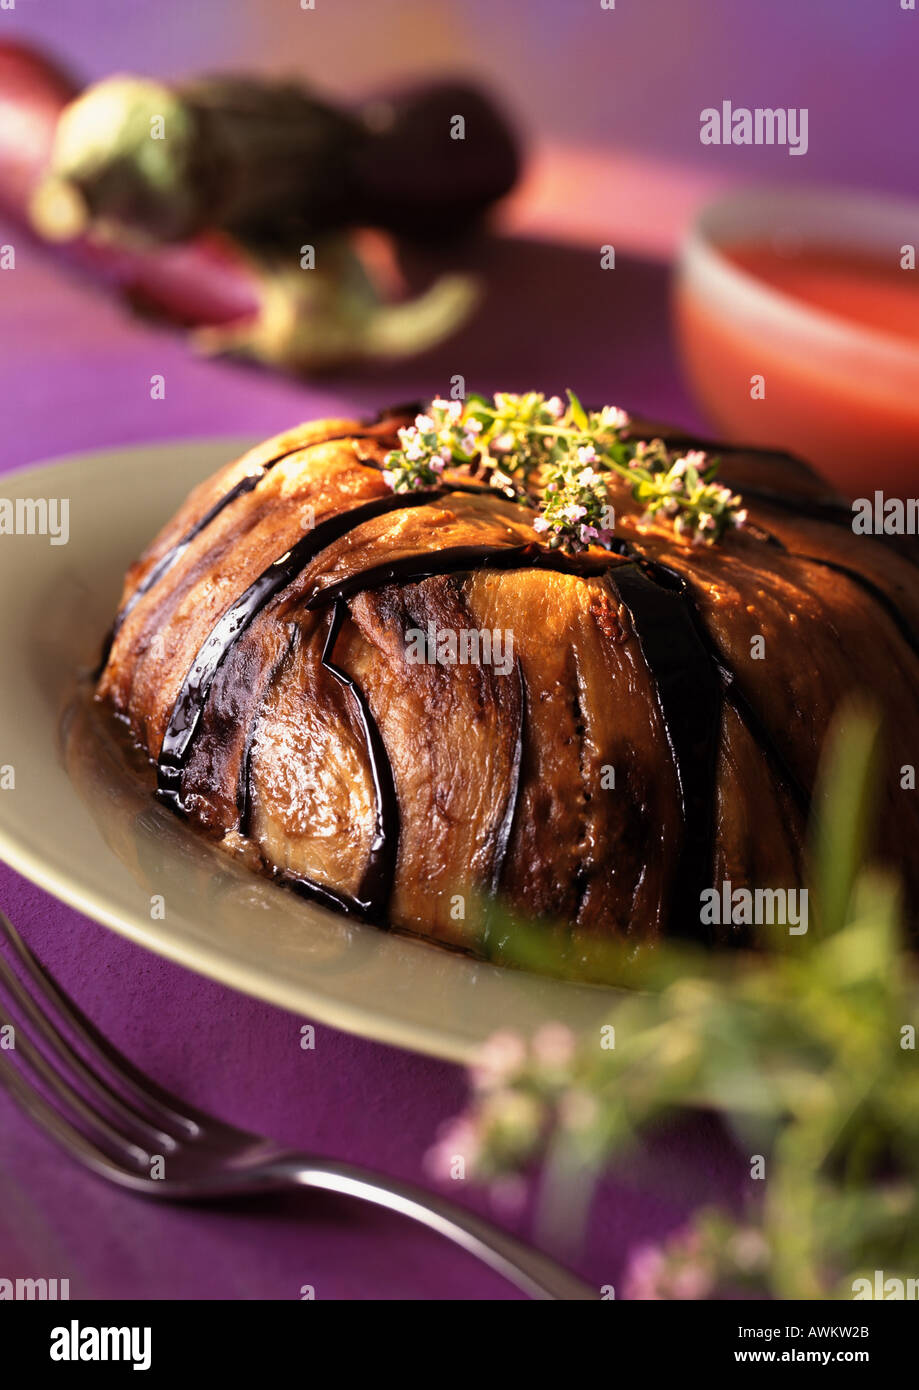 Eggplant cake on plate, topped with herbs, close-up Stock Photo